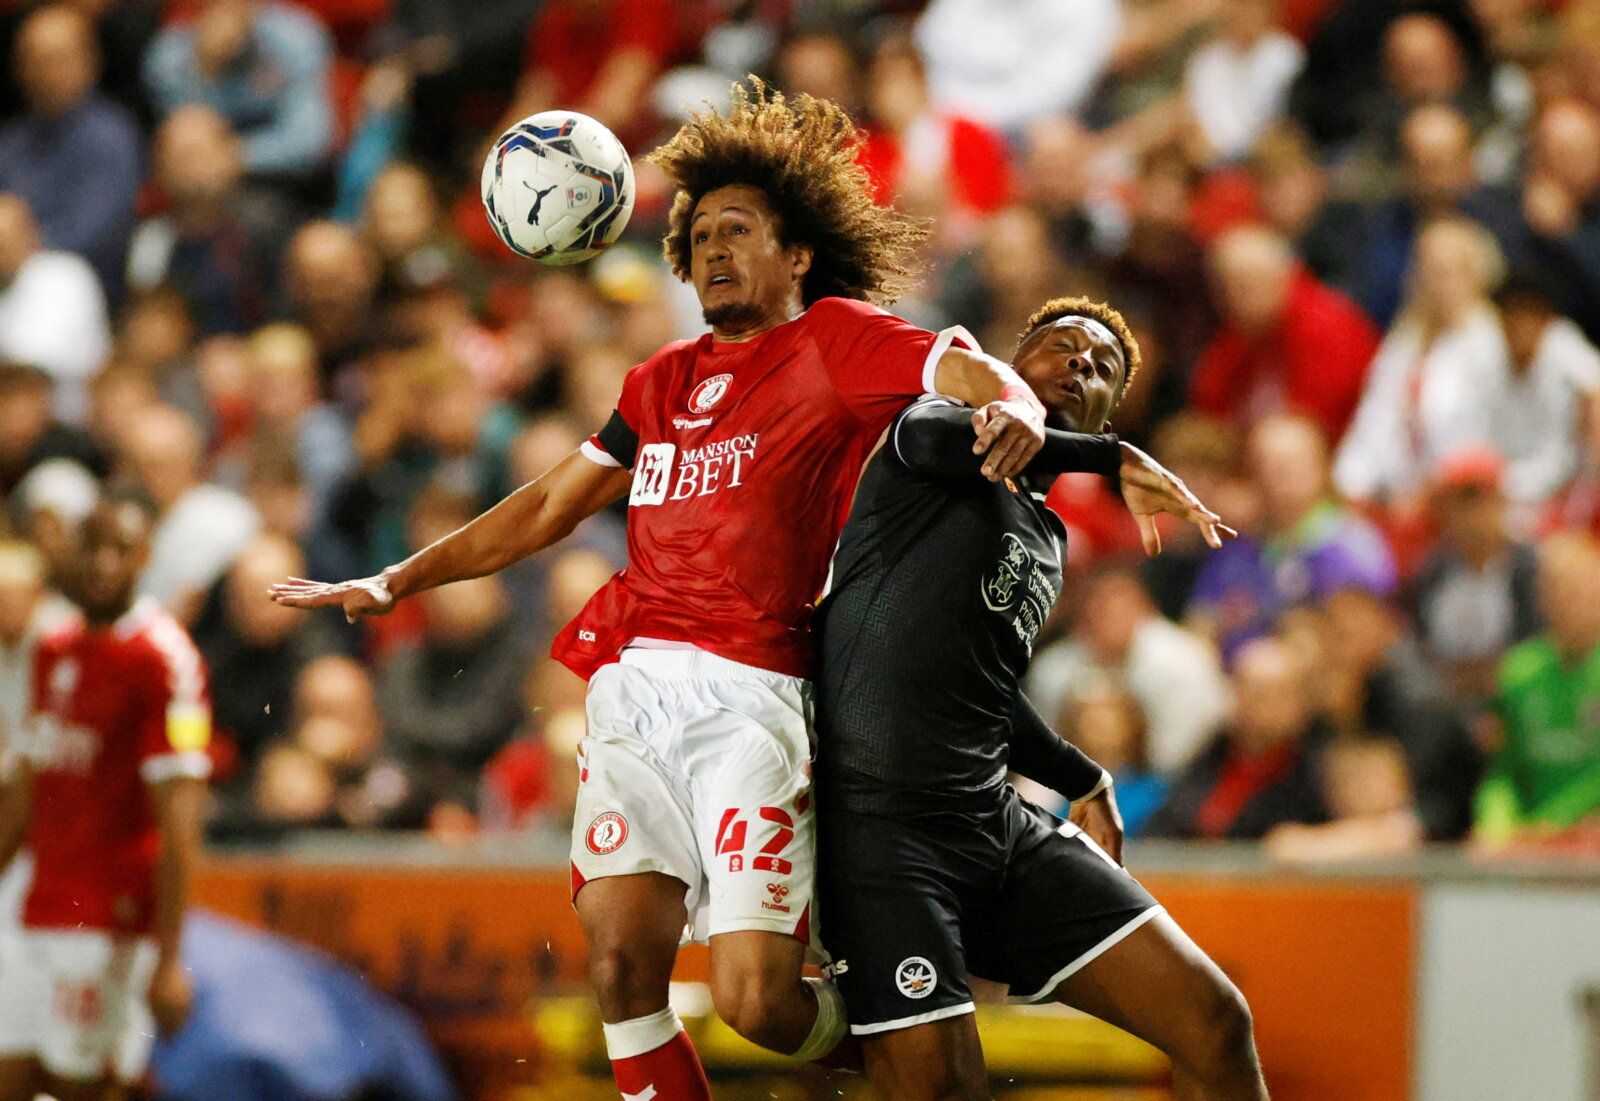 Soccer Football - Championship - Bristol City v Swansea City - Ashton Gate Stadium, Bristol, Britain - August 20, 2021  Bristol City's Han-Noah Massengo in action with Swansea City's Jamal Lowe  Action Images/John Sibley  EDITORIAL USE ONLY. No use with unauthorized audio, video, data, fixture lists, club/league logos or "live" services. Online in-match use limited to 75 images, no video emulation. No use in betting, games or single club/league/player publications.  Please contact your account r